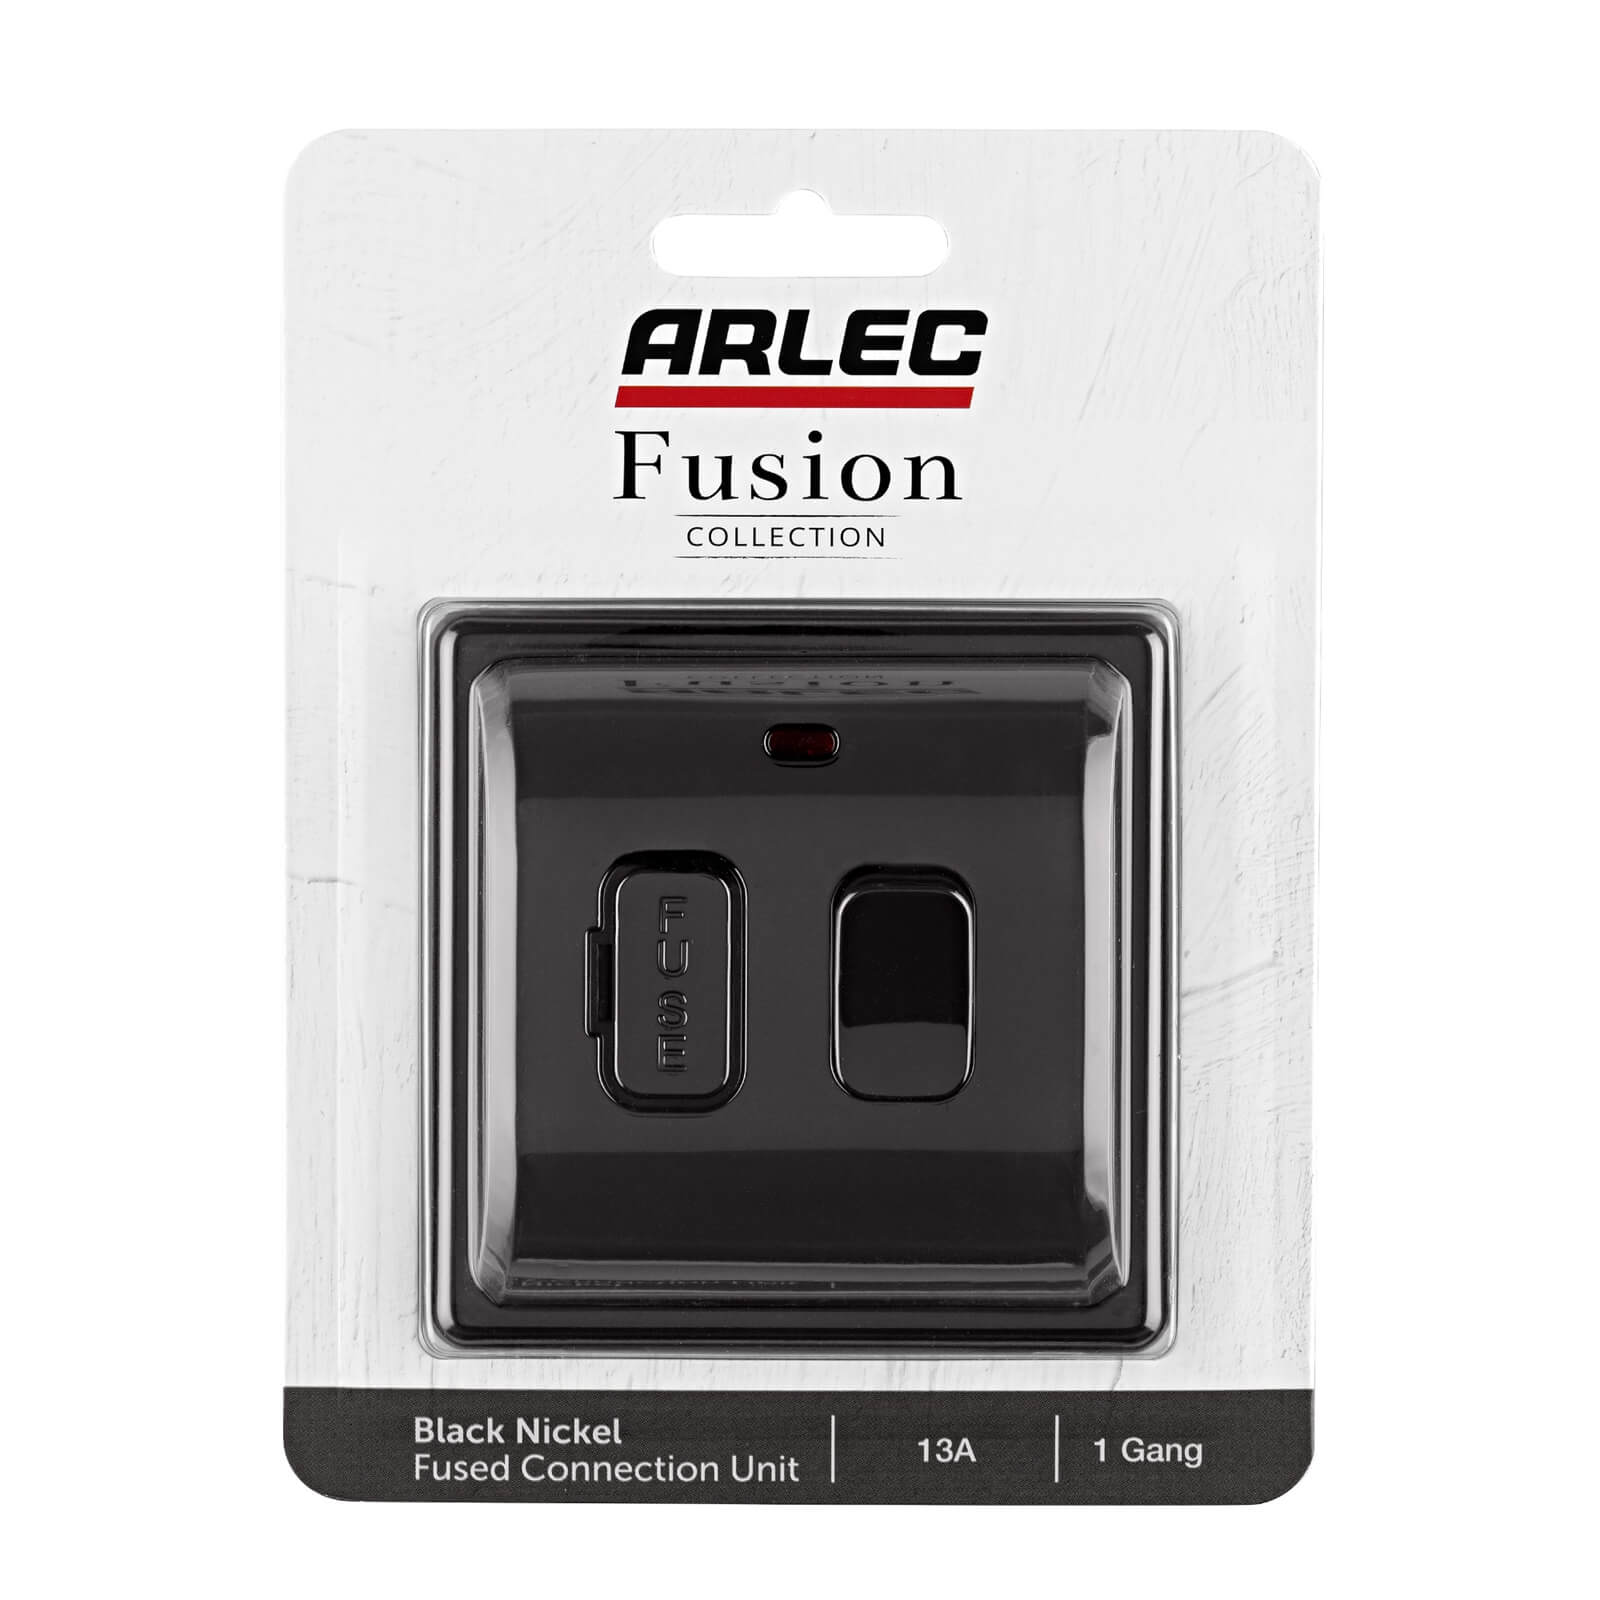 Arlec Fusion 13A Black Nickel Switched fused connection unit